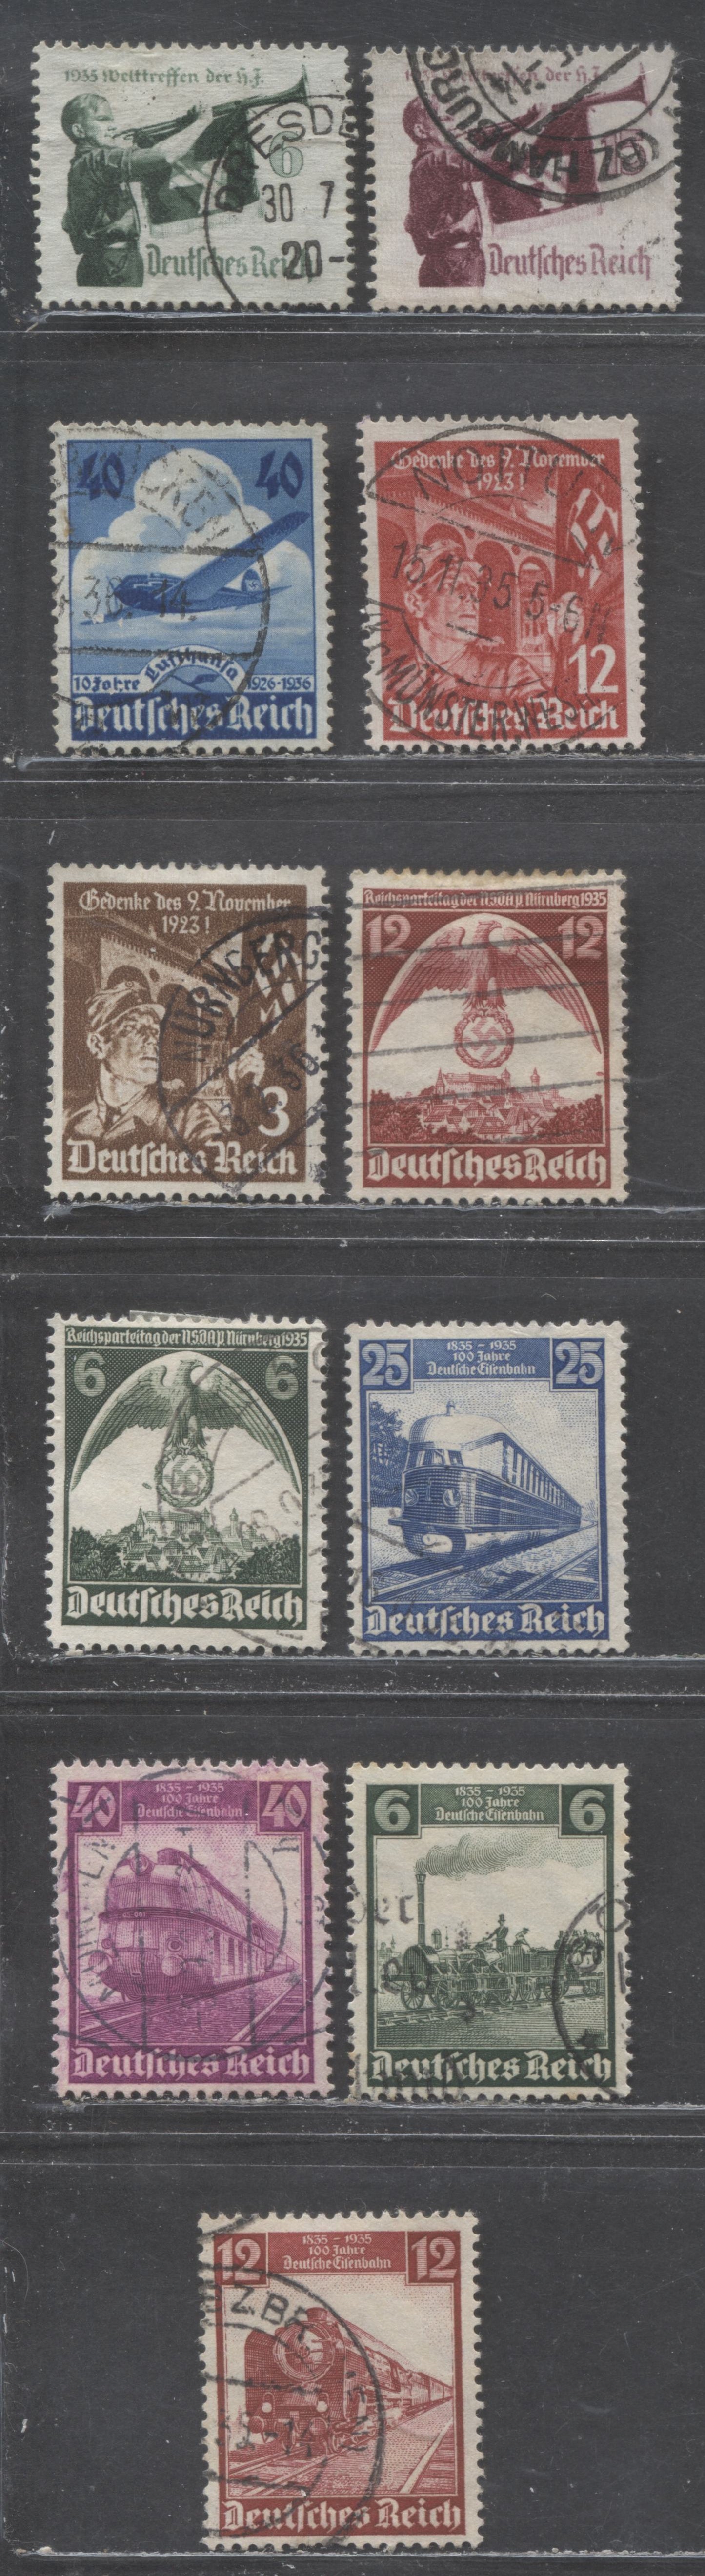 Lot 67 Germany SC#459-469 1935 Railroad Centenary - 10th Anniversary Of Lufthansa Air Service Issues, 11 Fine/Very Fine Used Singles, Click on Listing to See ALL Pictures, Estimated Value $12